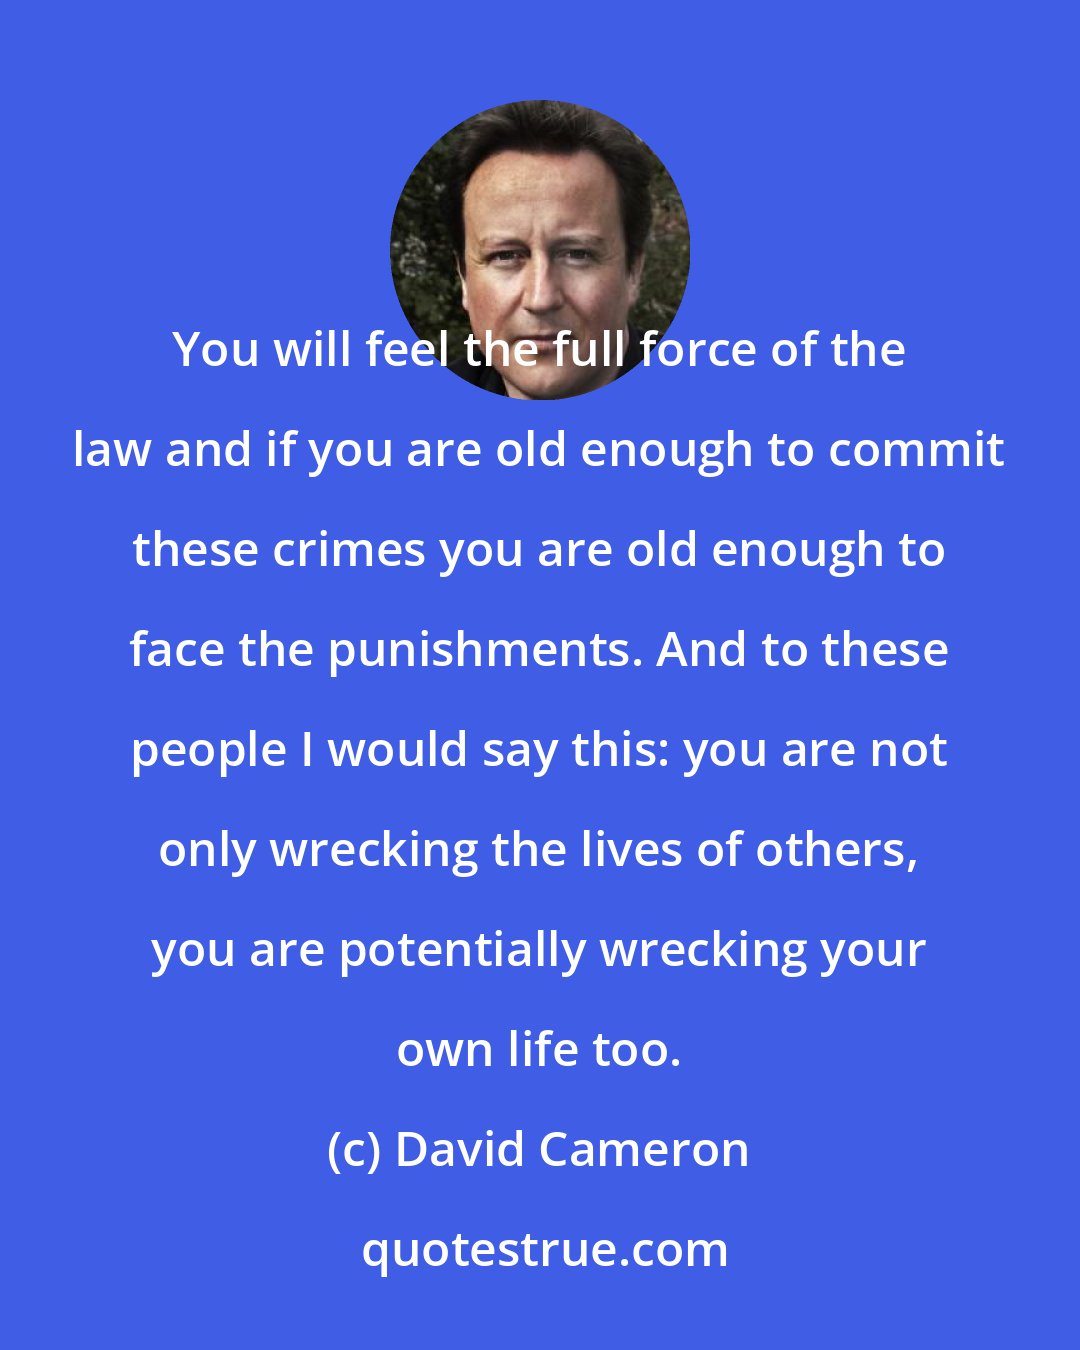 David Cameron: You will feel the full force of the law and if you are old enough to commit these crimes you are old enough to face the punishments. And to these people I would say this: you are not only wrecking the lives of others, you are potentially wrecking your own life too.